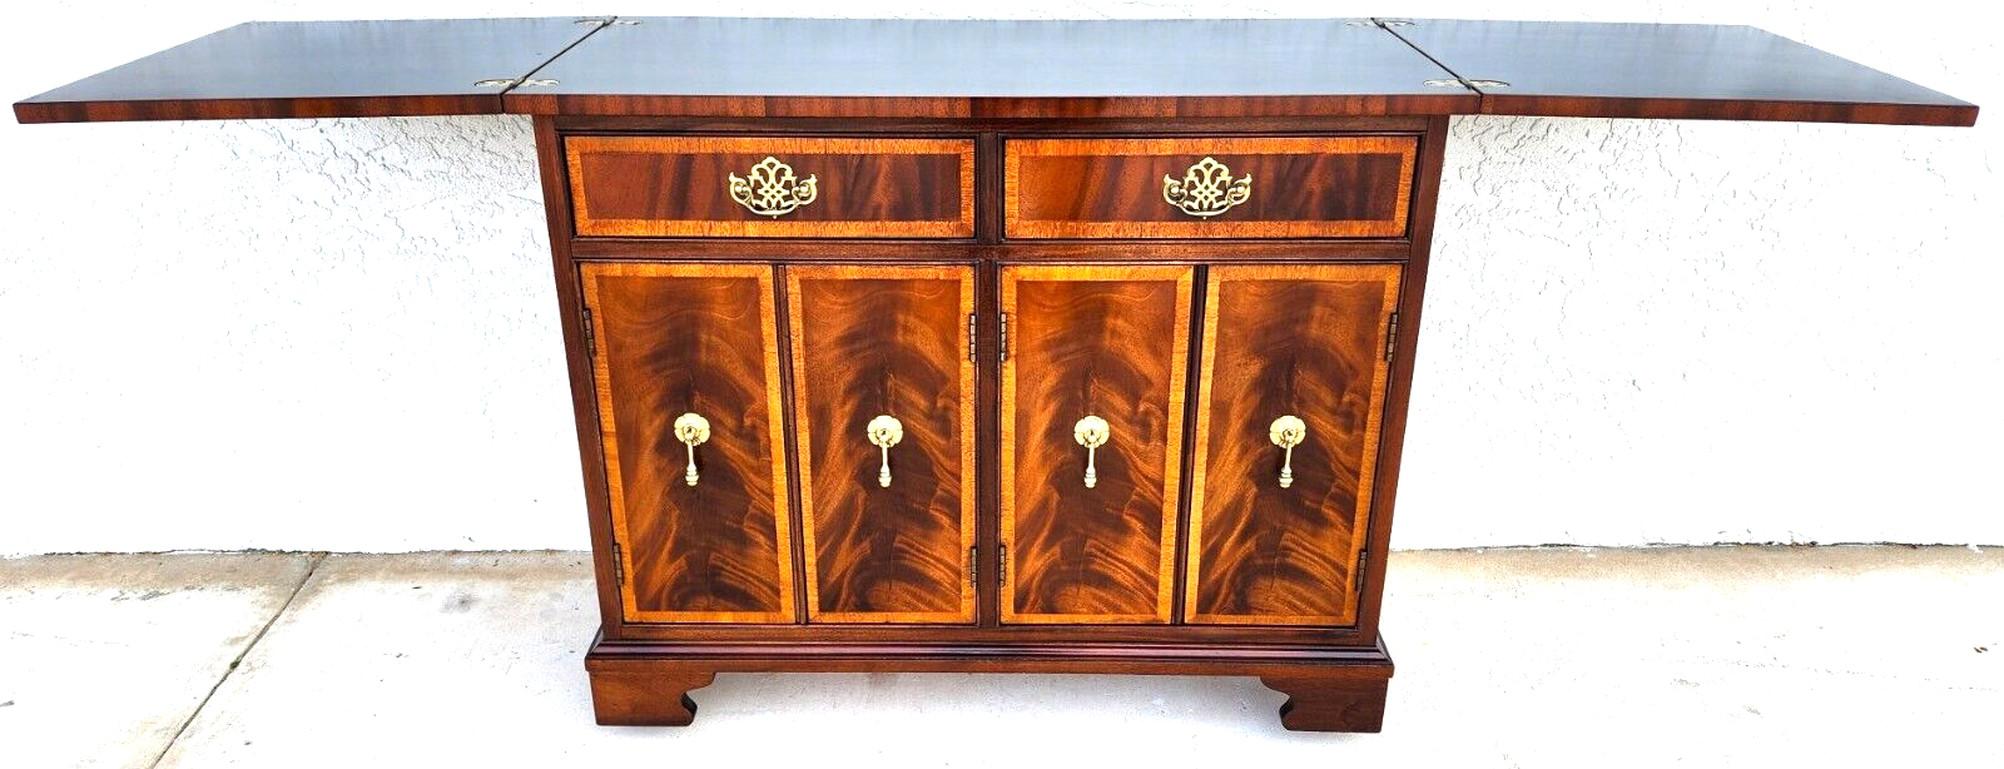 For FULL item description click on CONTINUE READING at the bottom of this page.

Offering One Of Our Recent Palm Beach Estate Fine Furniture Acquisitions Of A
Vintage Rolling Buffet Dry Bar Sideboard Fliptop Flame Mahogany by HICKORY WHITE
Featuring